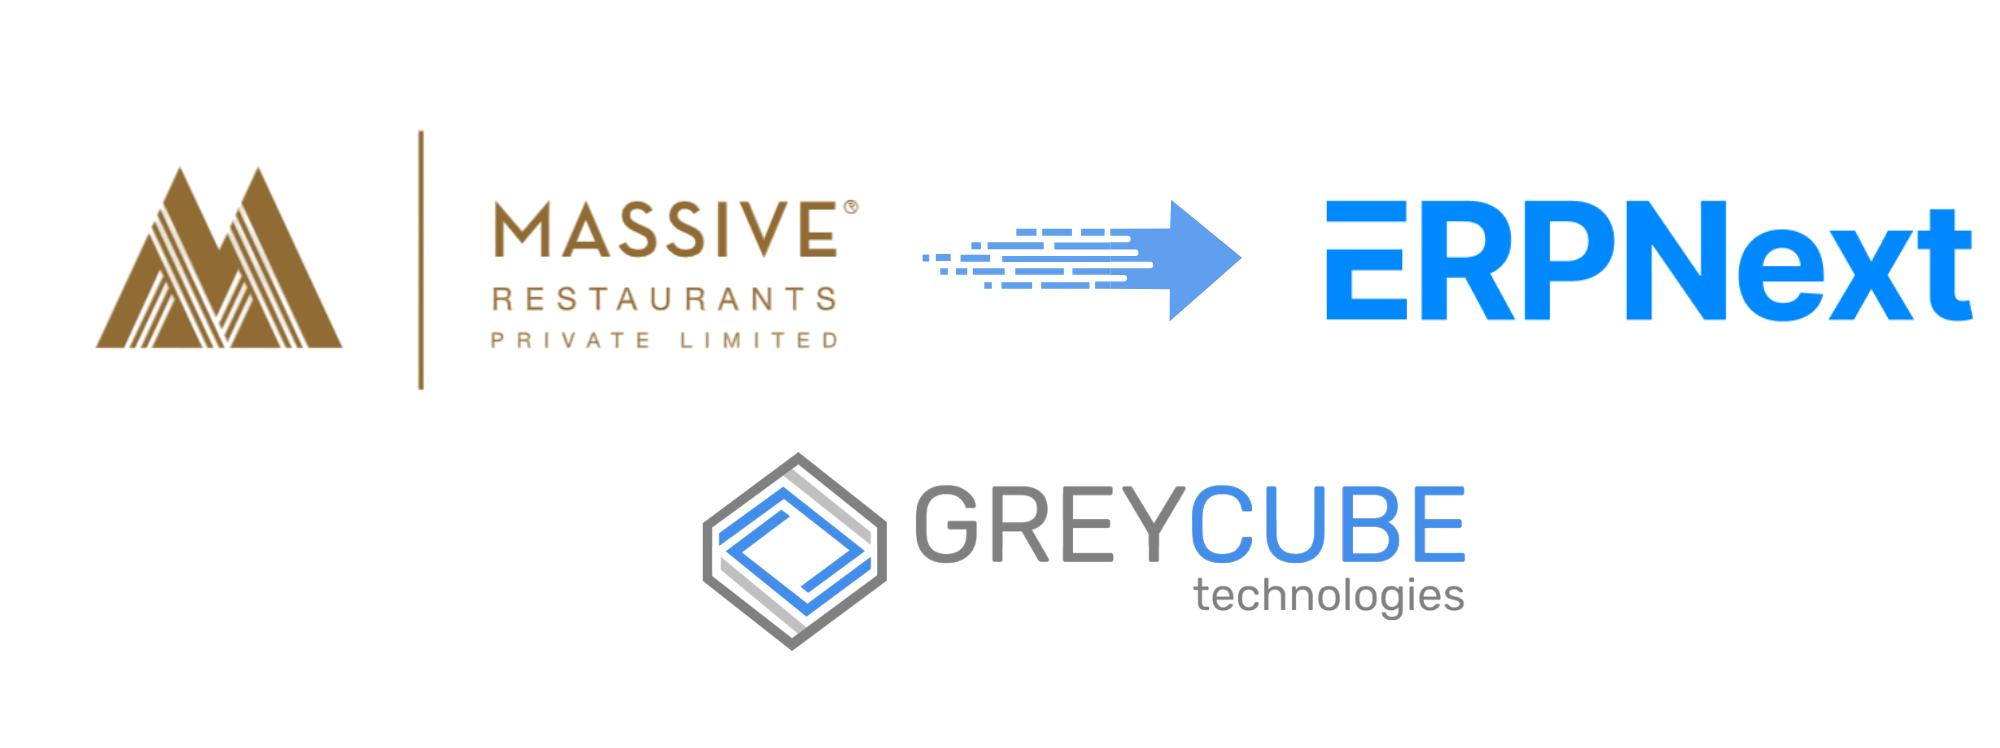 Massive Restaurants sailed smoothly from Tally to ERPNext with GreyCube - Cover Image